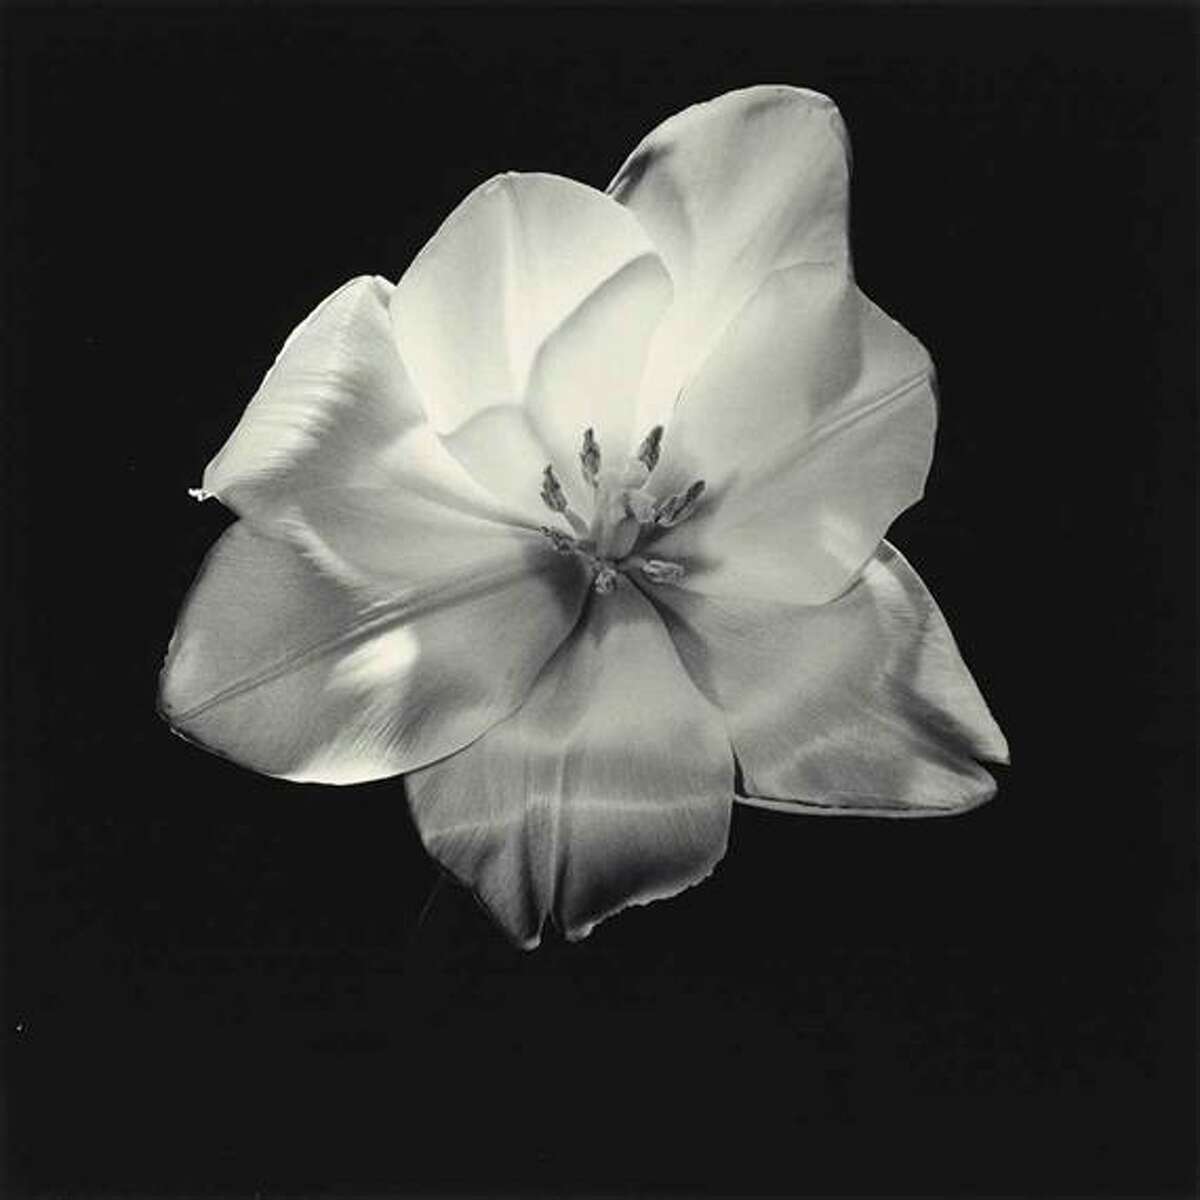 Photographs on view in the annual "Deck the Halls" show at Catherine Couturier Gallery include Robert Mapplethorpe's "Tulip," from 1985.